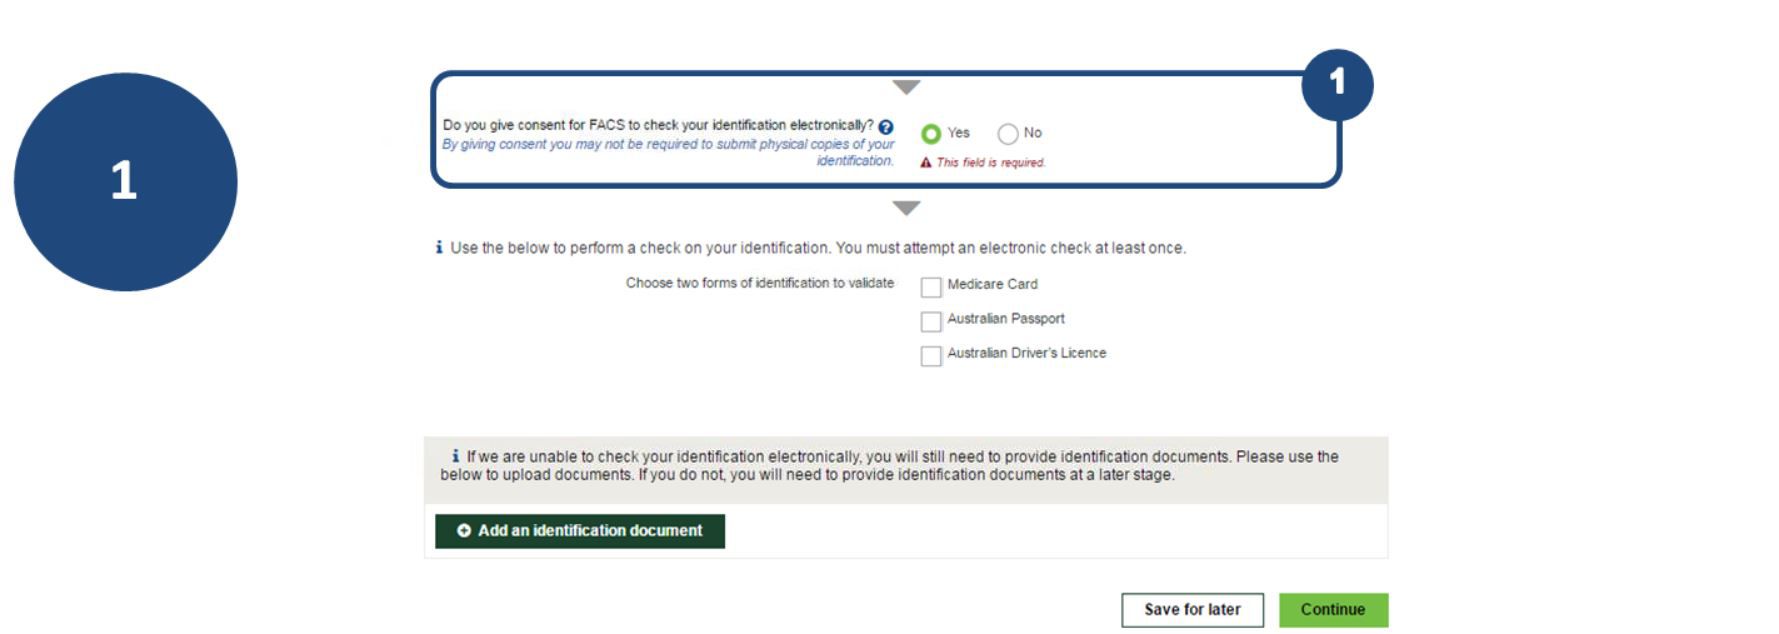 1. Click "Yes" to consent for FACS to check your identification electronically